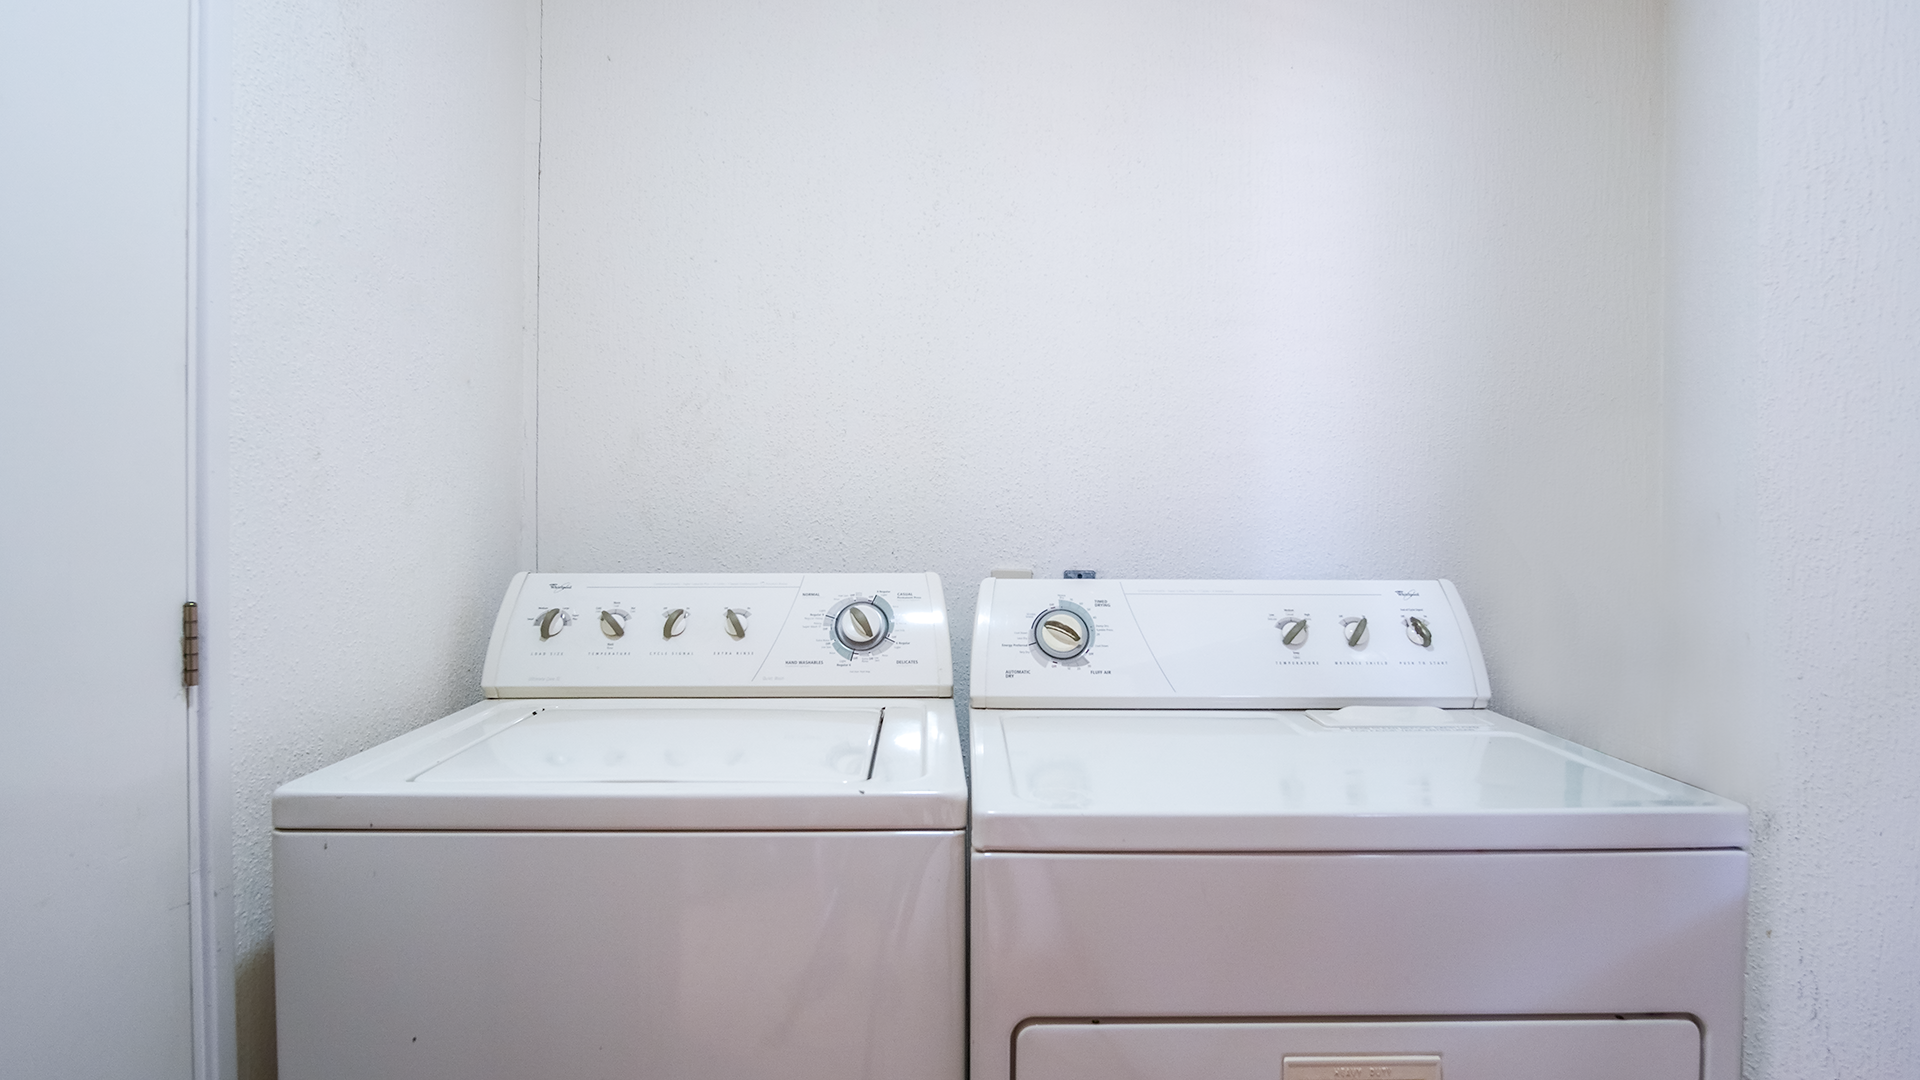 washer and dryer in utility room